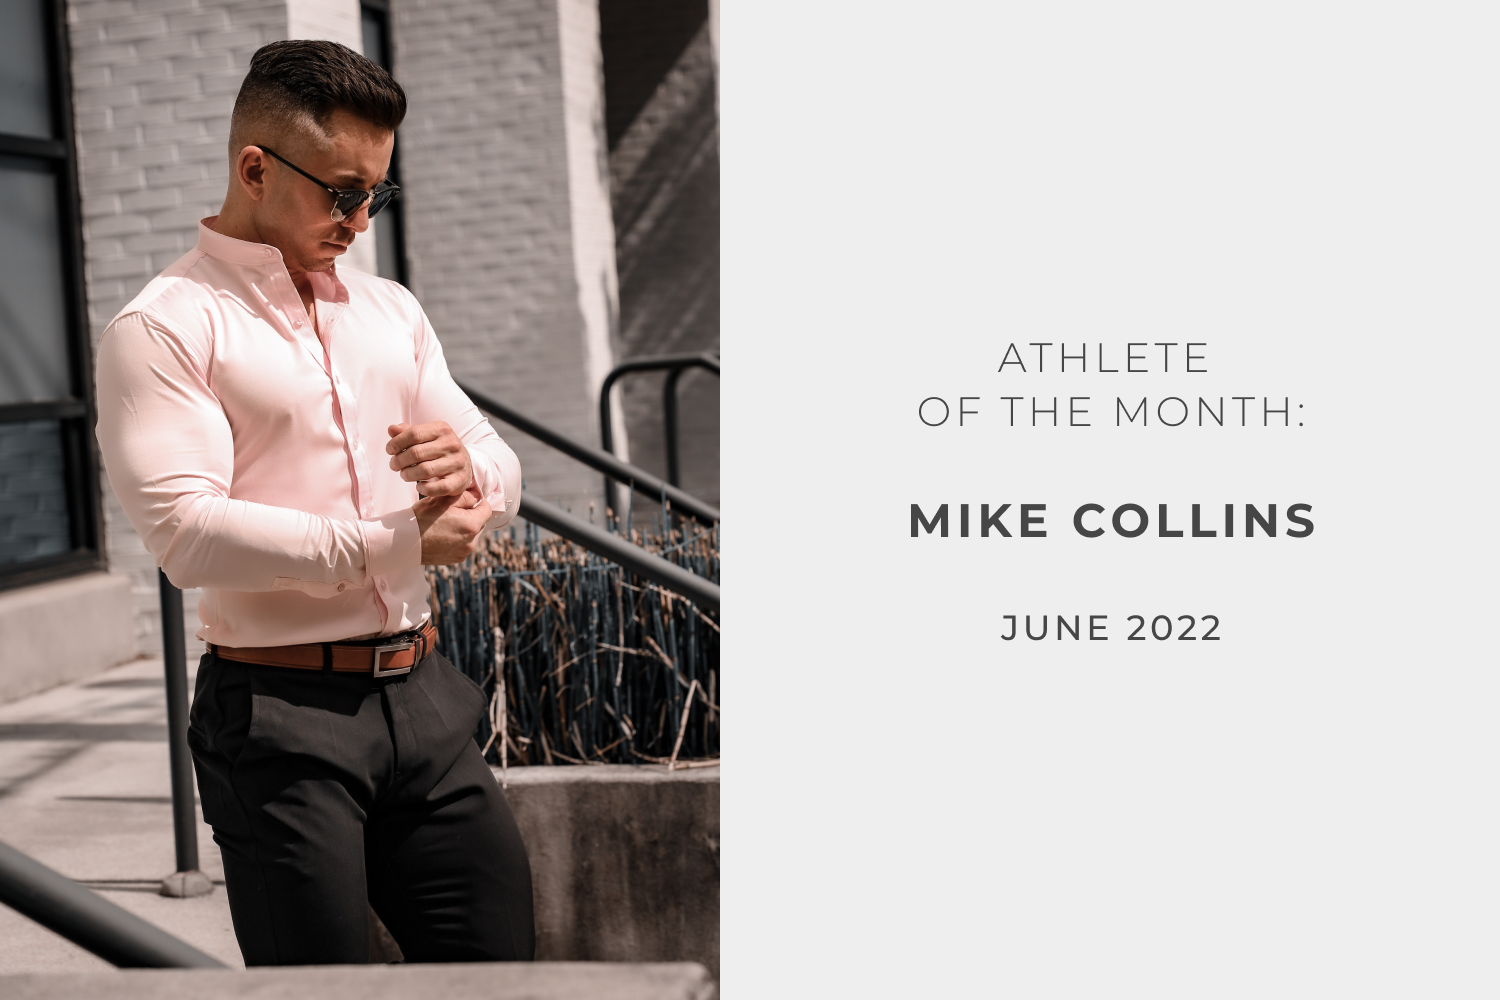 ATHLETE OF PRIDE MONTH: MIKE COLLINS